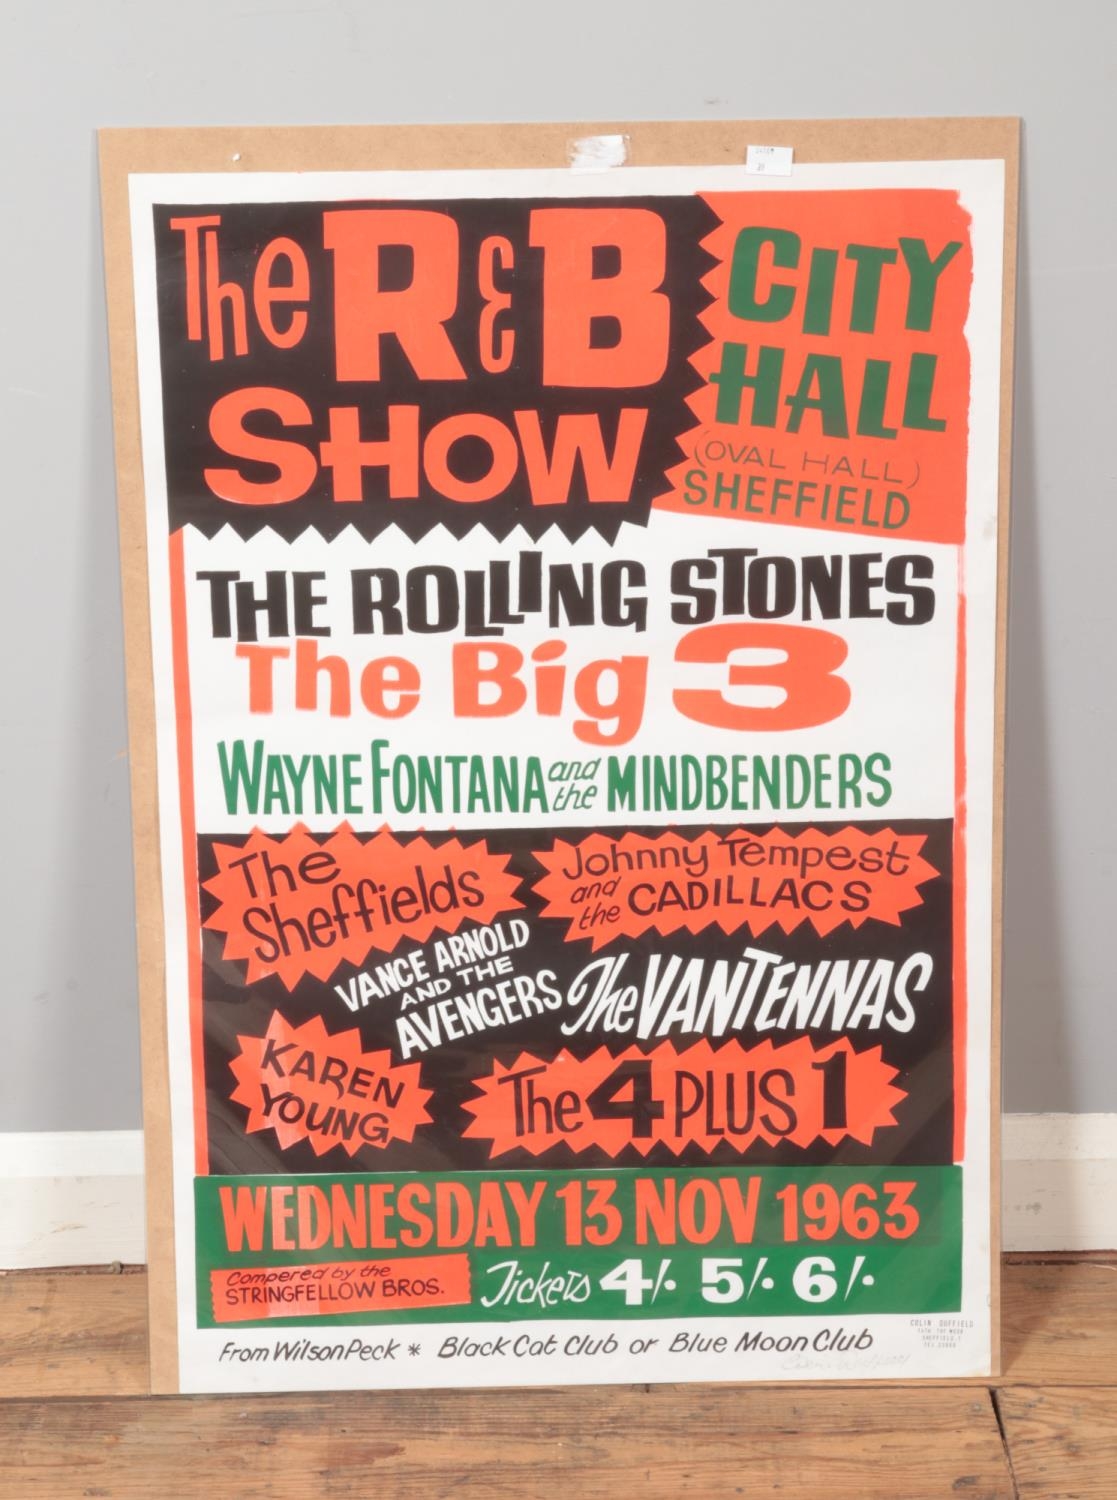 A reproduction Colin Duffield poster for Sheffield City Hall 13th November 1963 featuring The